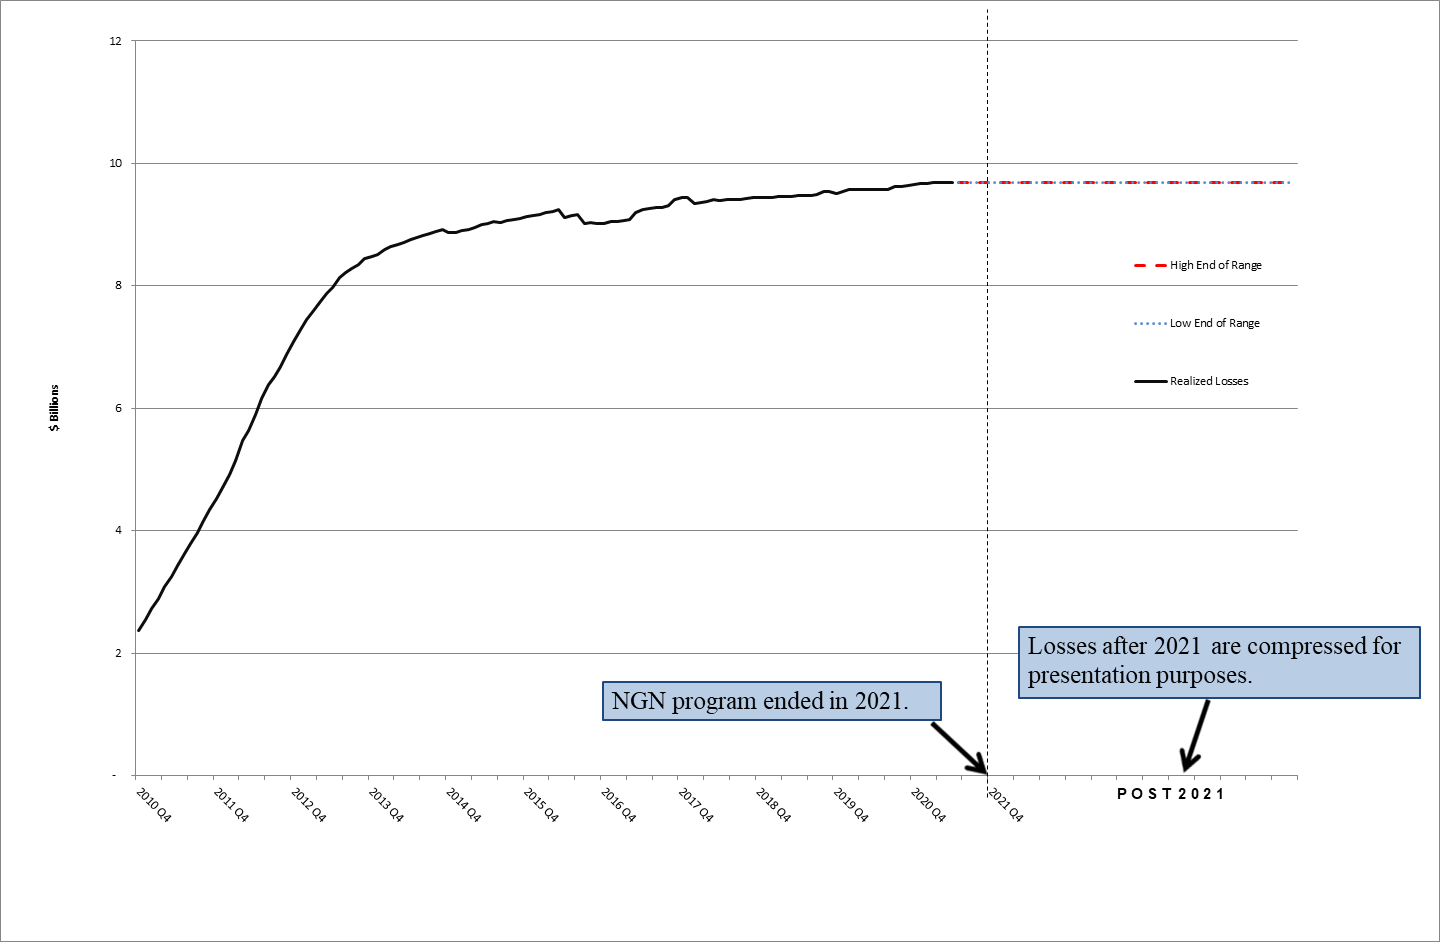 This line graph shows a timeline trend of historical losses, followed by a high and low end projection of losses on the legacy assets. The x-axis is time marked by year (starting year 2010 Q4, ending year 2021 Q4, and post-2021 thereafter). The y-axis is loss amount in billions of dollars. The graph shows the historical losses from 2010 Q4 to 2021 Q2, increasing from $2.4 billion in 2010 Q4 to approximately $9.7 billion for all assets from the failed corporates since issuance. For the projected future losses after 2021 Q2, the graph under pessimistic and optimistic assumptions shows a lifetime loss which is also $9.7 billion. The NGN Program ended in June 2021.